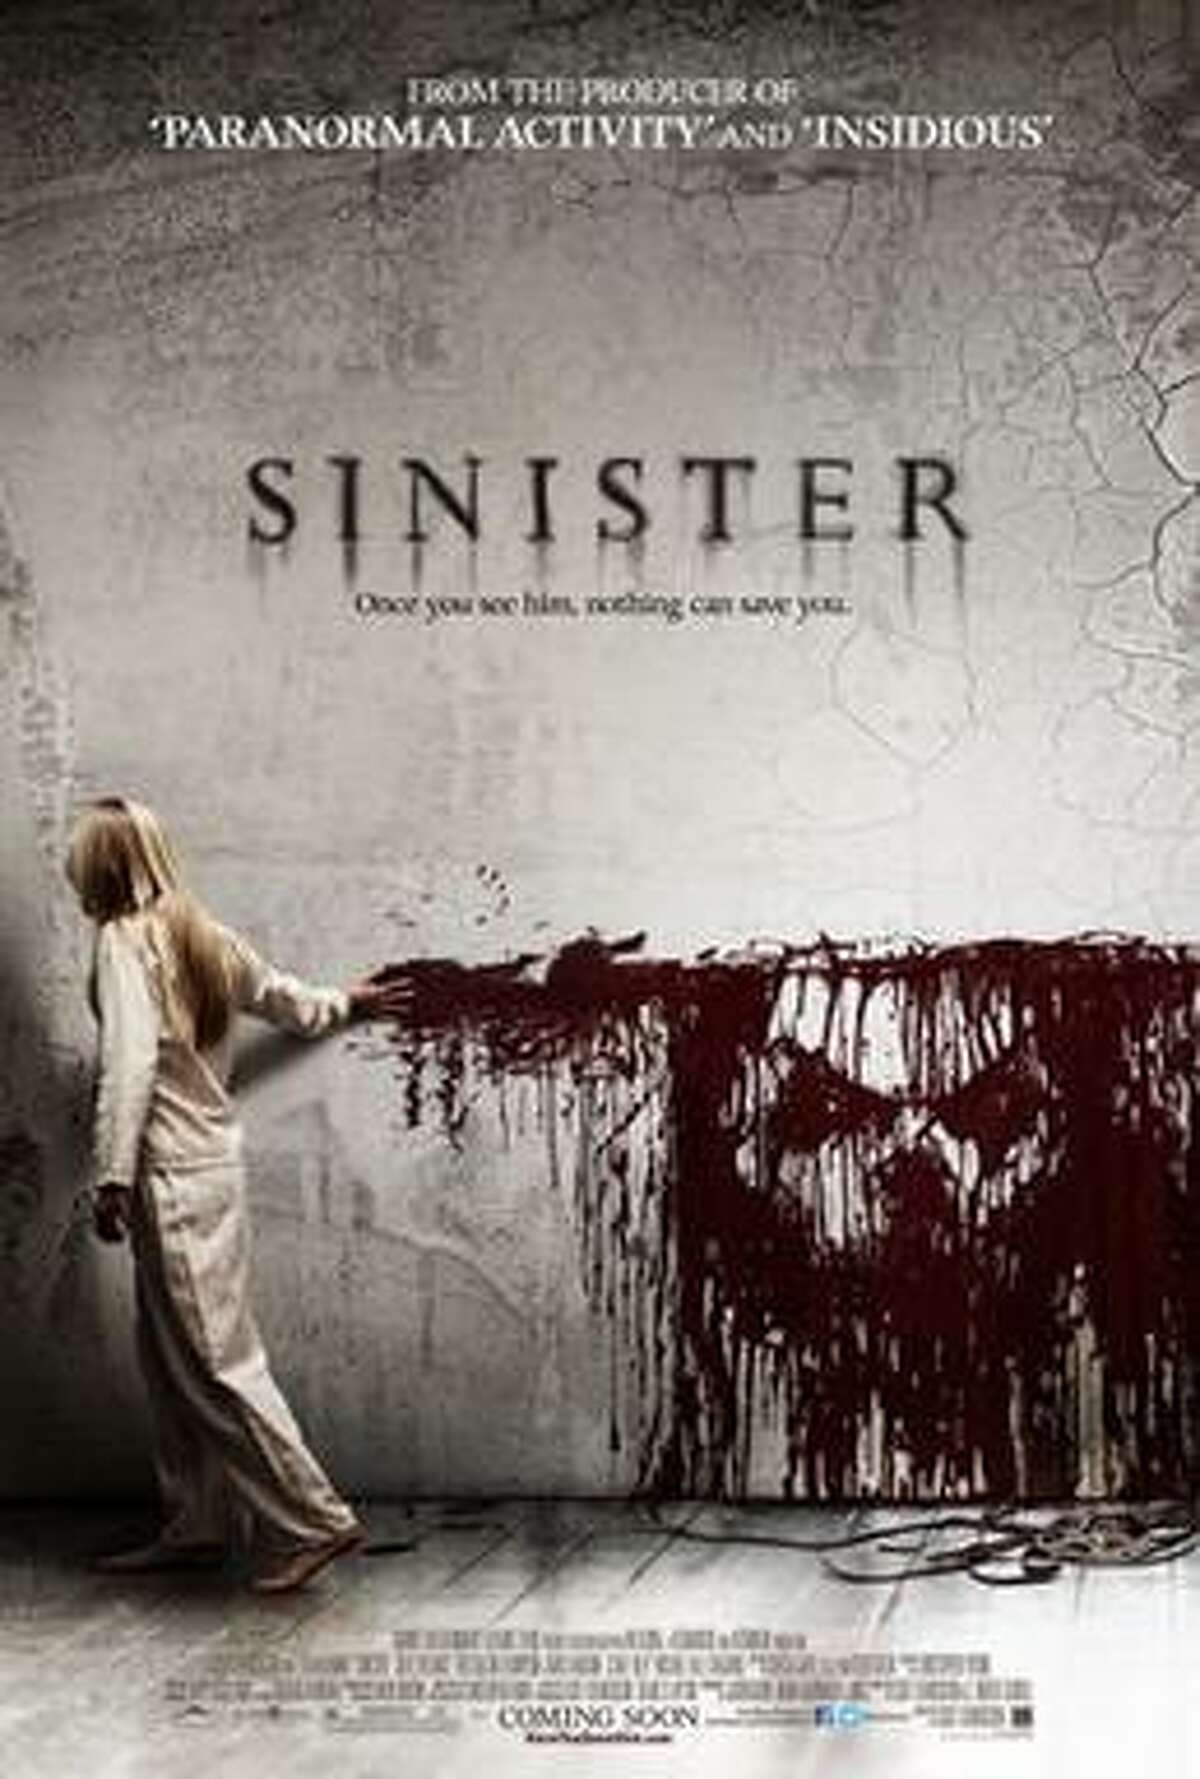 Sinister, according to science, is the scariest movie. 